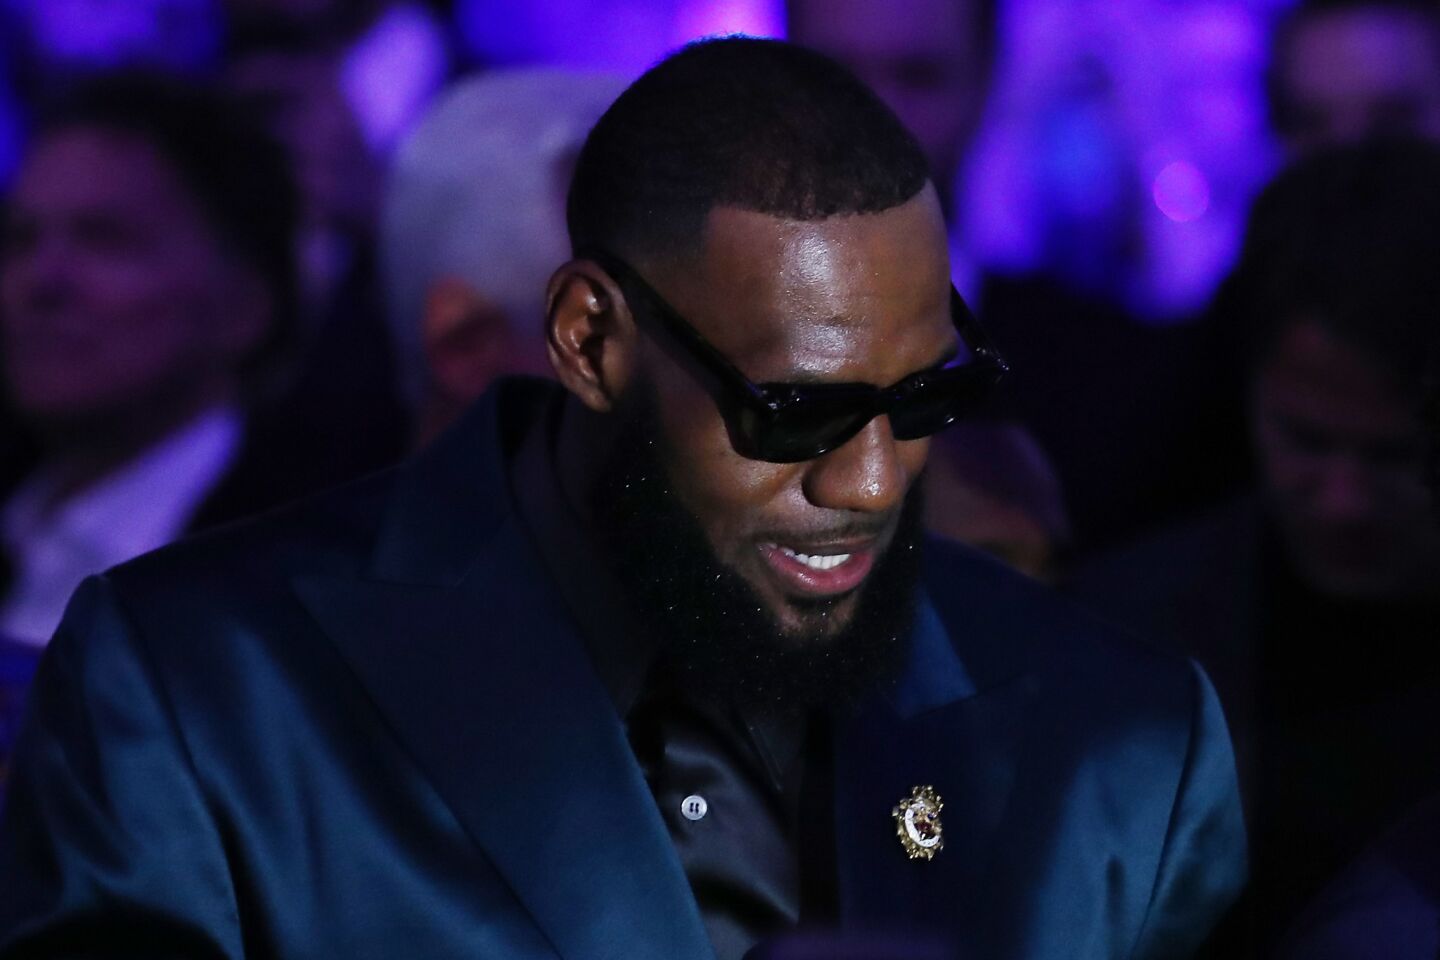 LeBron James attends the Gennady Golovkin and Canelo Alvarez fight during their WBC/WBA middleweight title fight at T-Mobile Arena on September 15, 2018 in Las Vegas, Nevada.